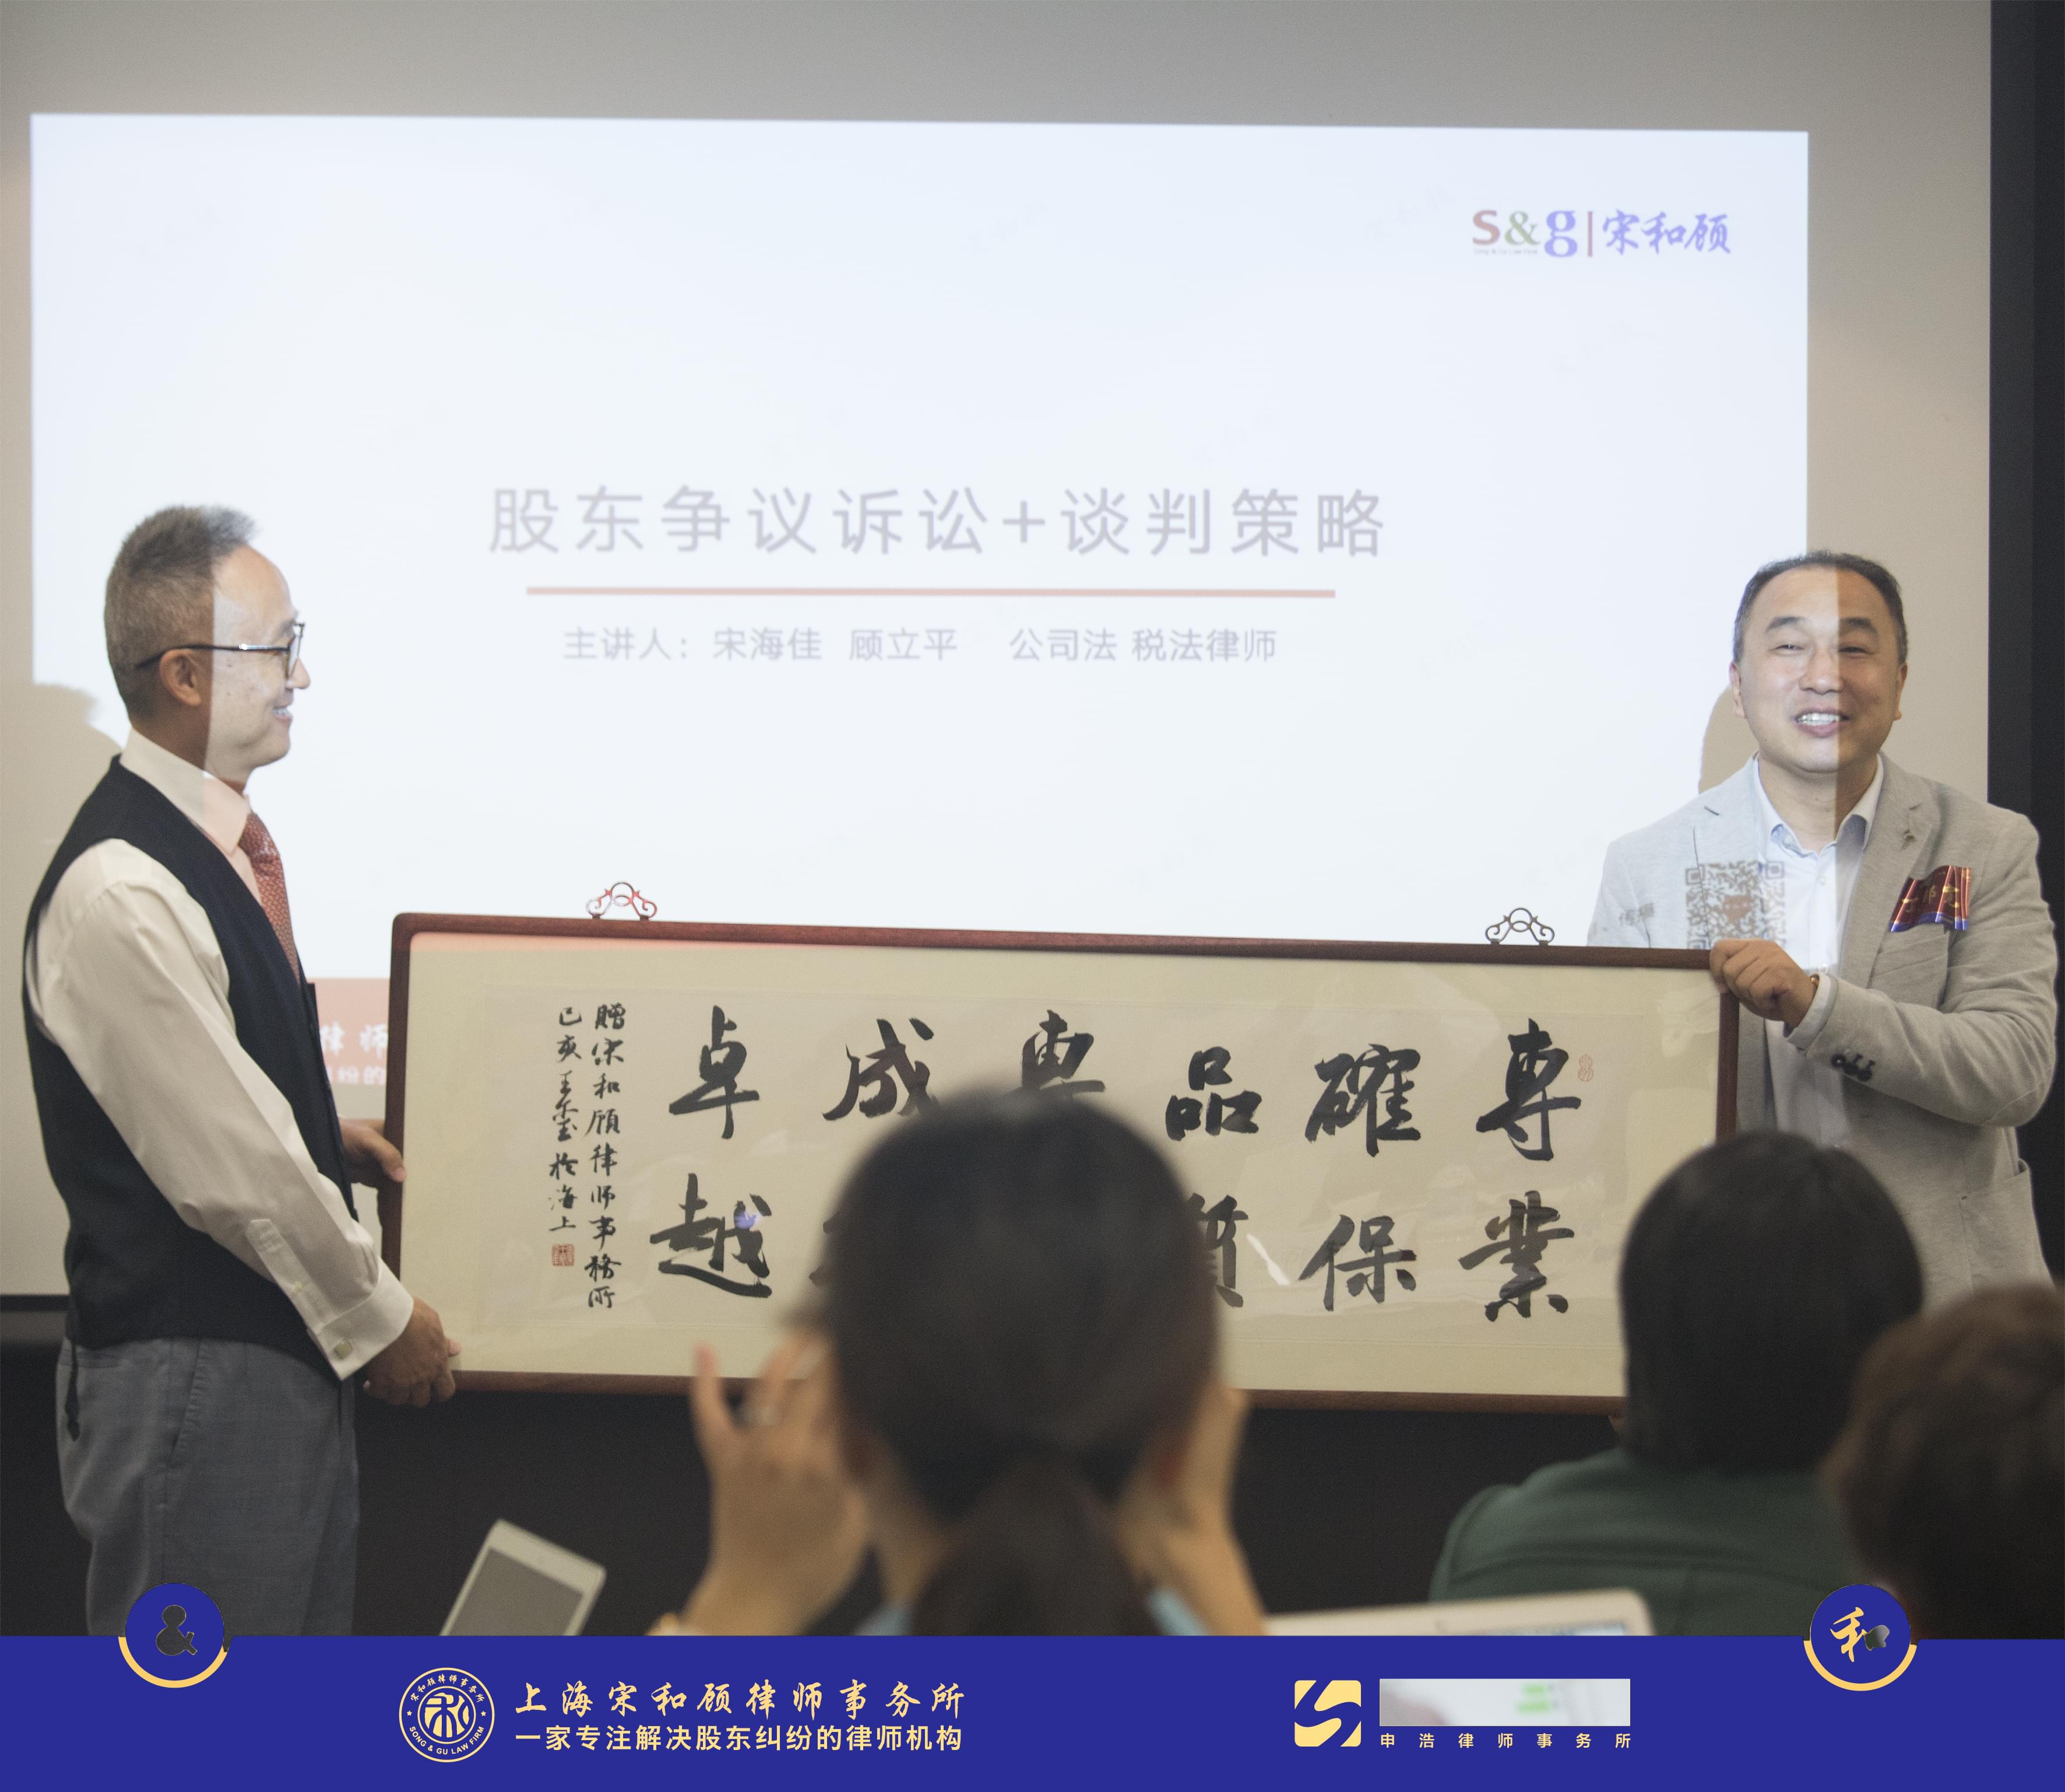 Equity Course 2019: Shareholder Dispute Litigation and Negotiation Training Launched in Shanghai